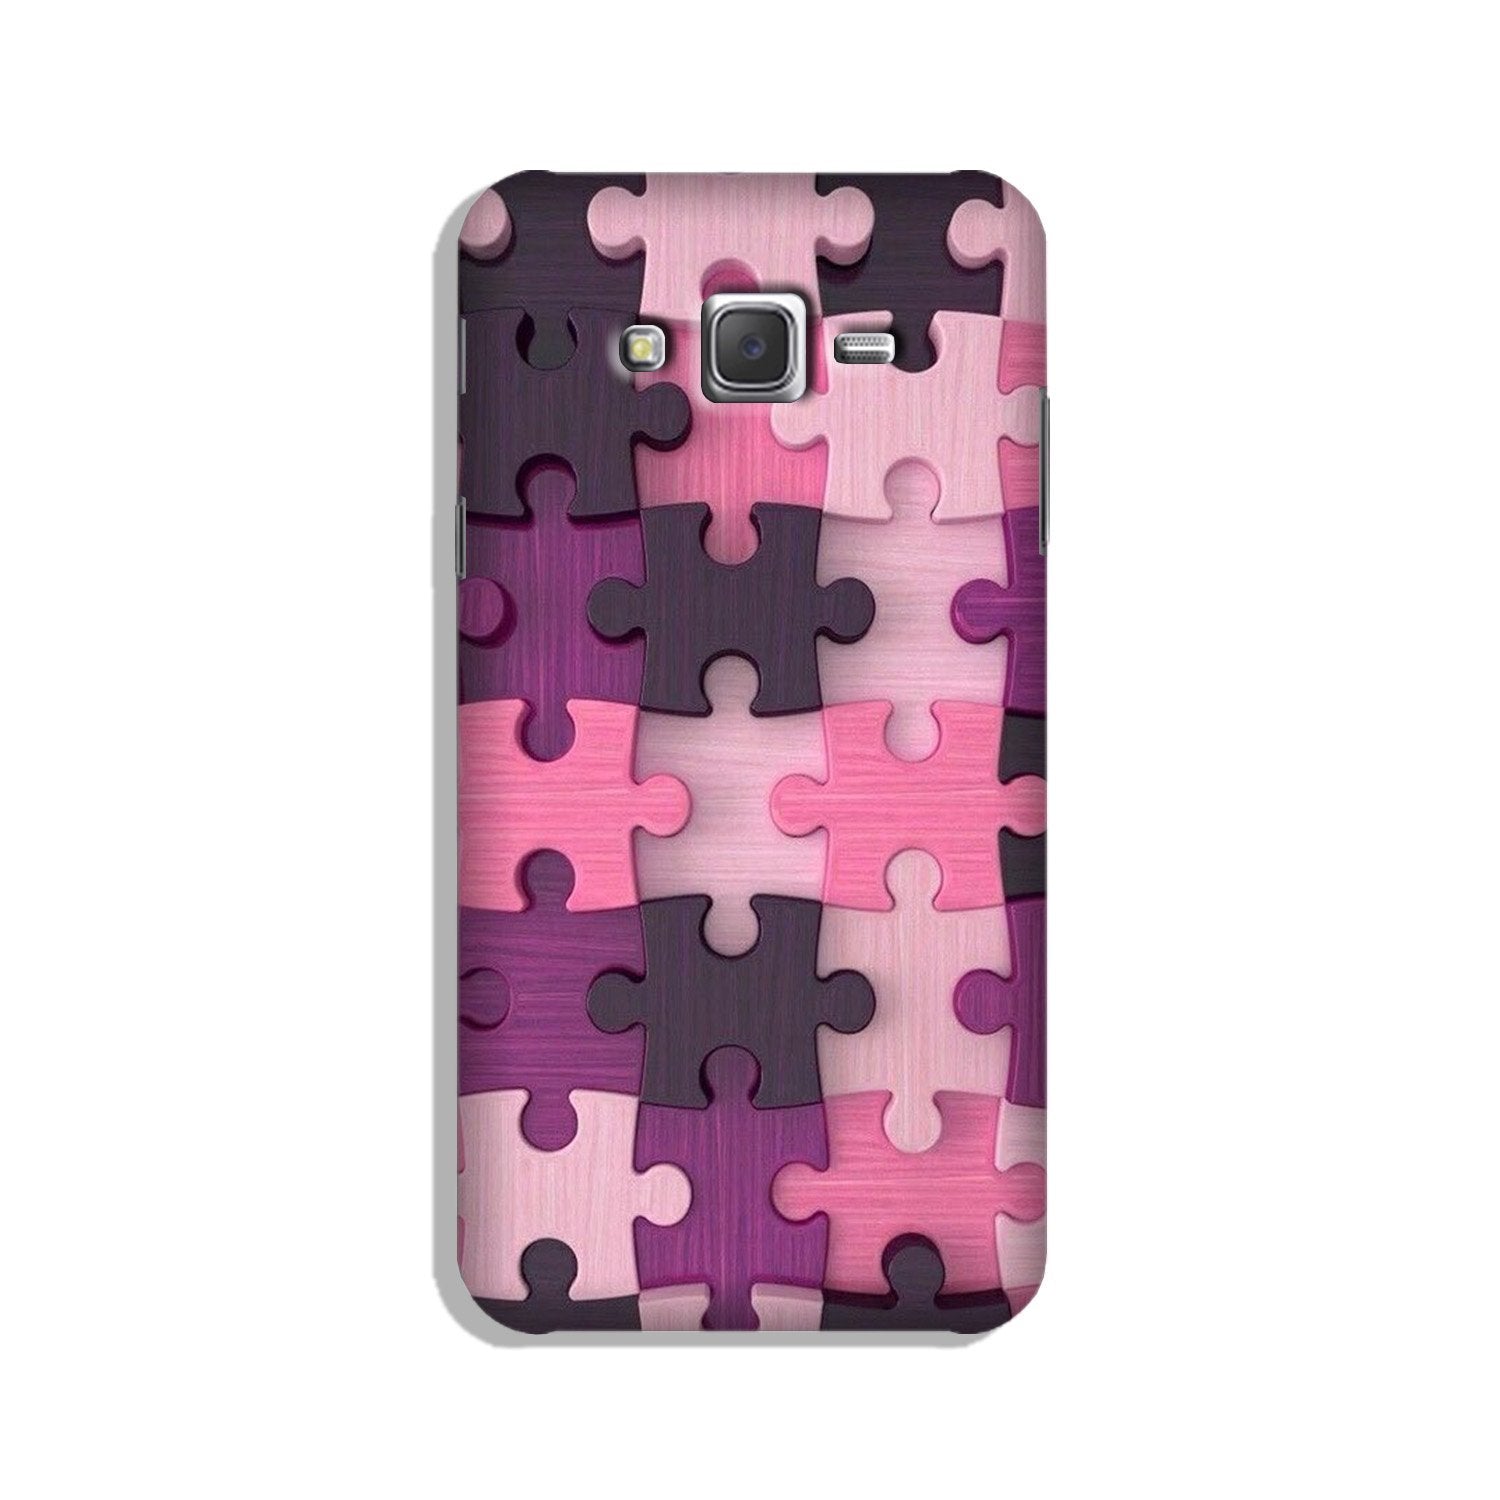 Puzzle Case for Galaxy J7 Nxt (Design - 199)